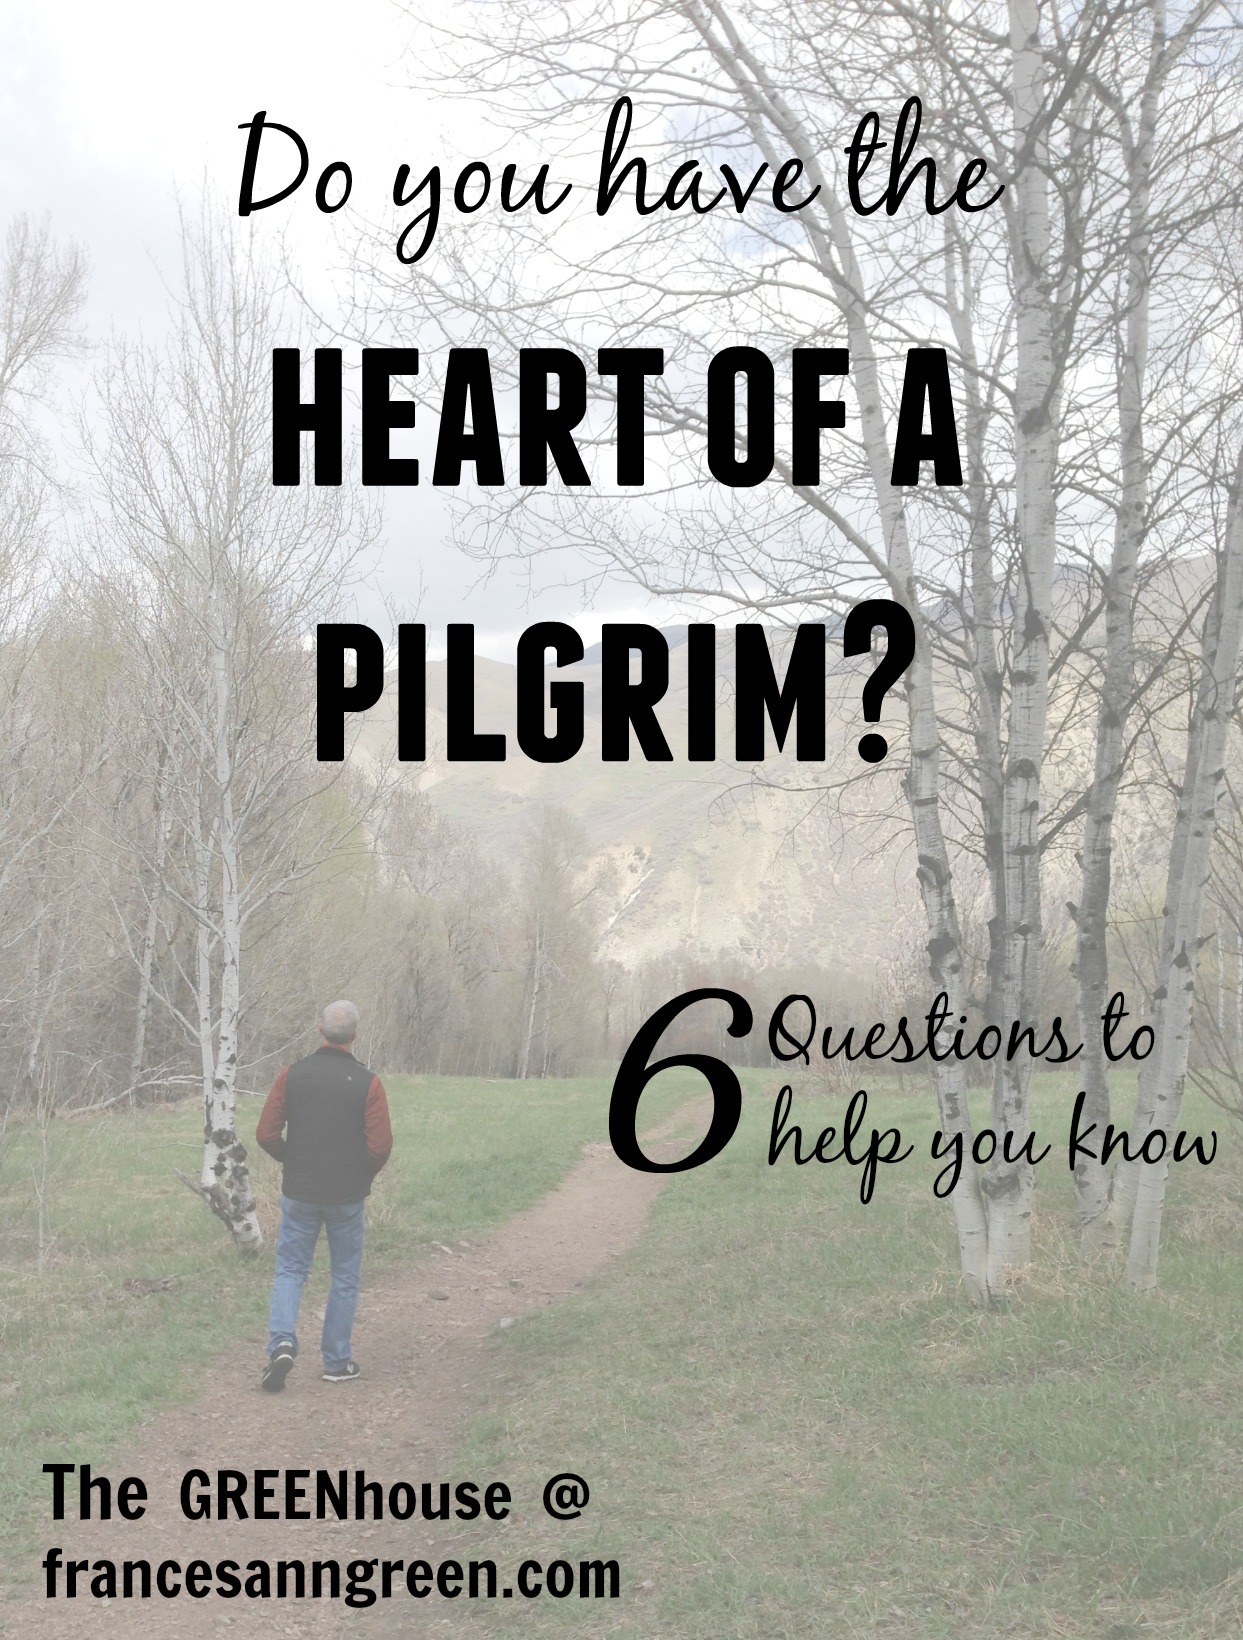 Do you have the heart of a pilgrim? 6 questions to help you know.